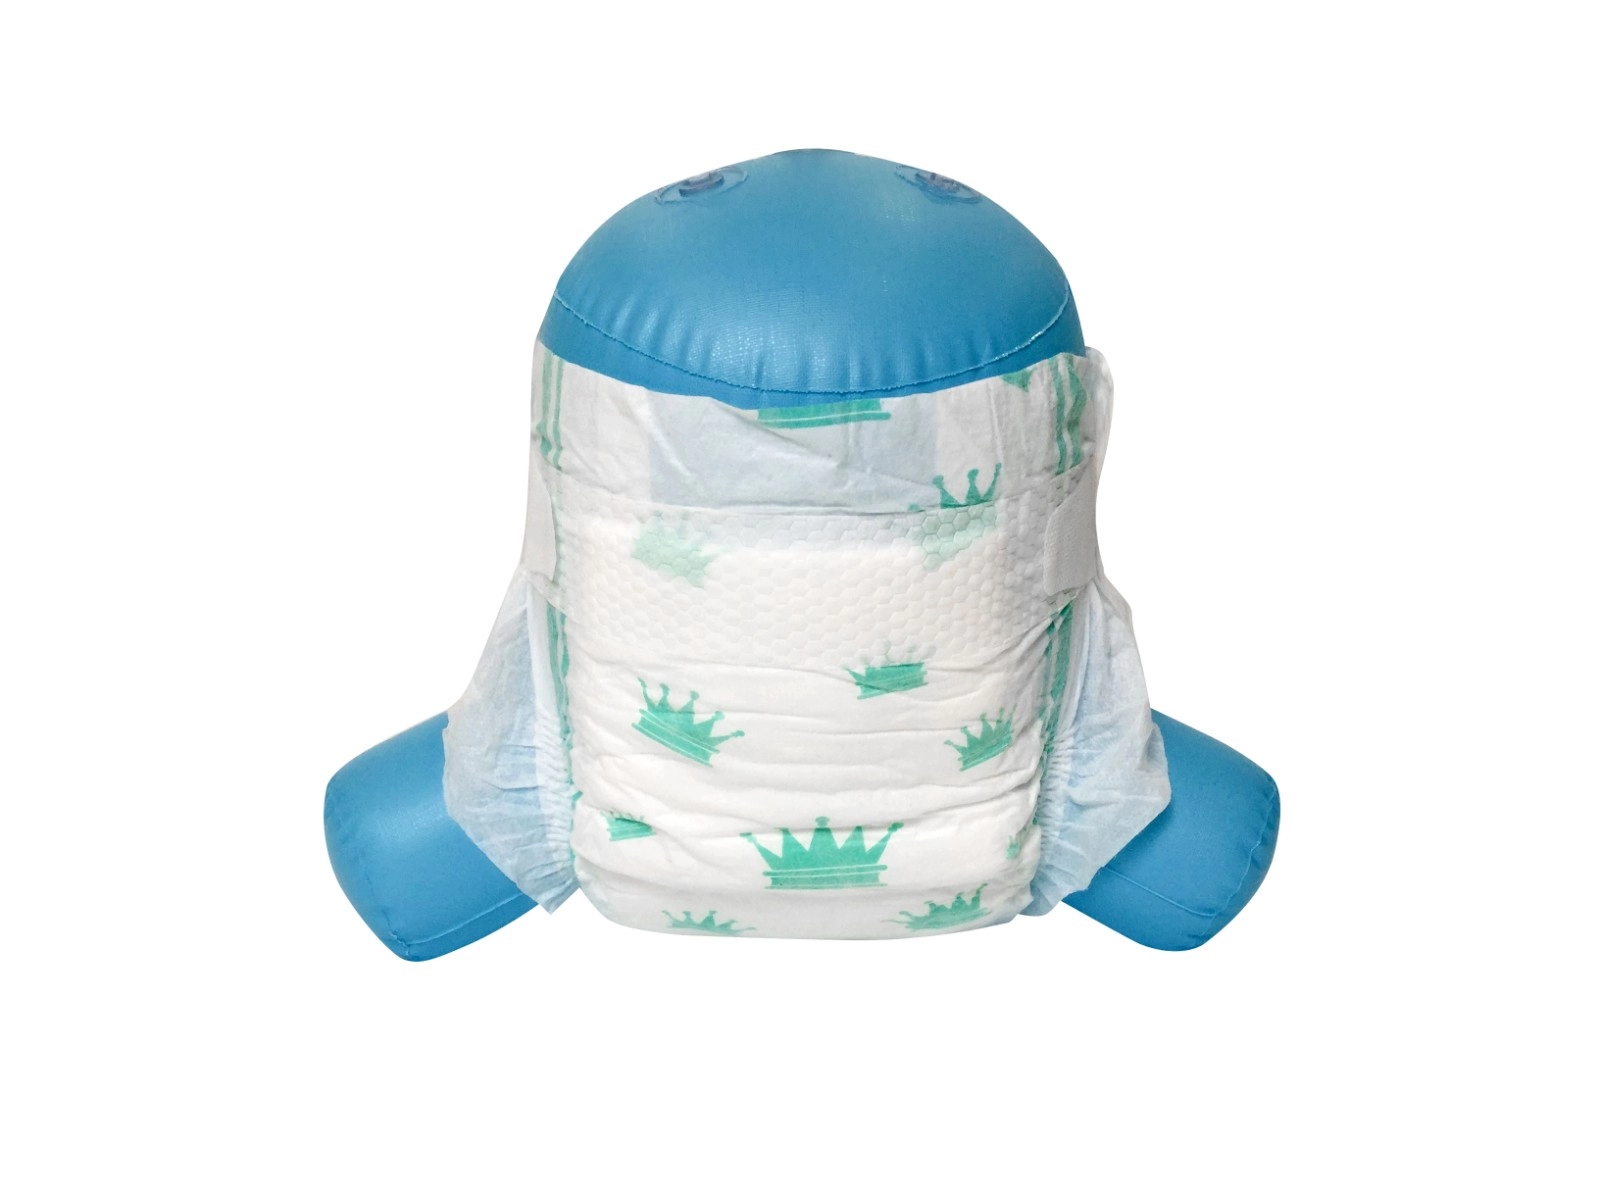 Premium High Quality Soft Care Disposable Baby Diaper